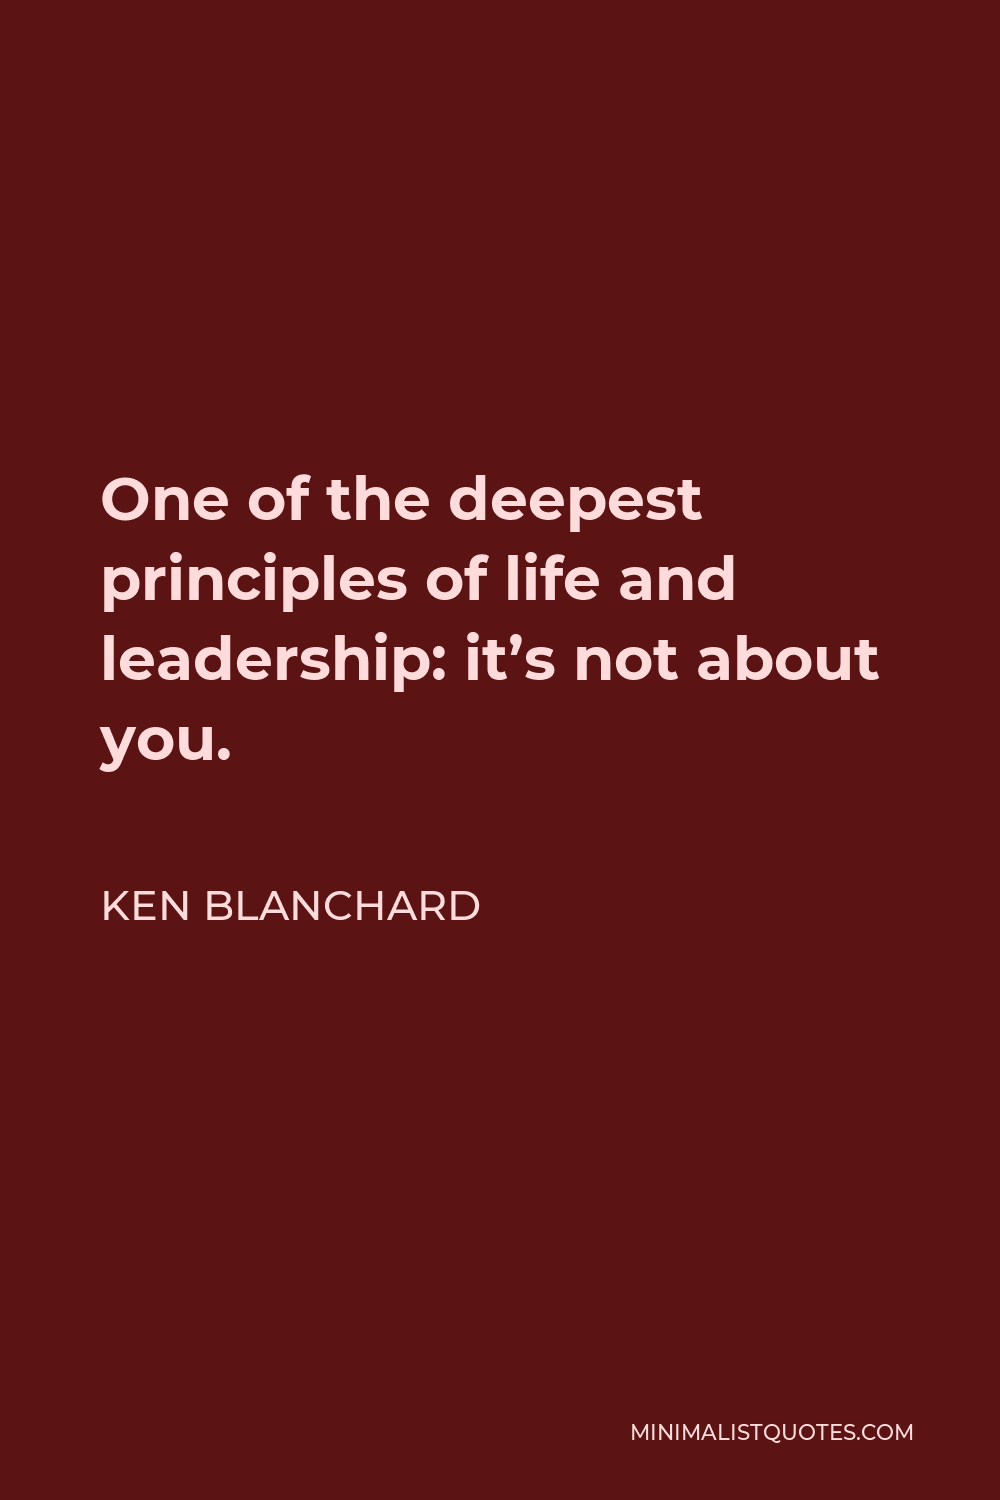 Ken Blanchard Quote - One of the deepest principles of life and leadership: it’s not about you.